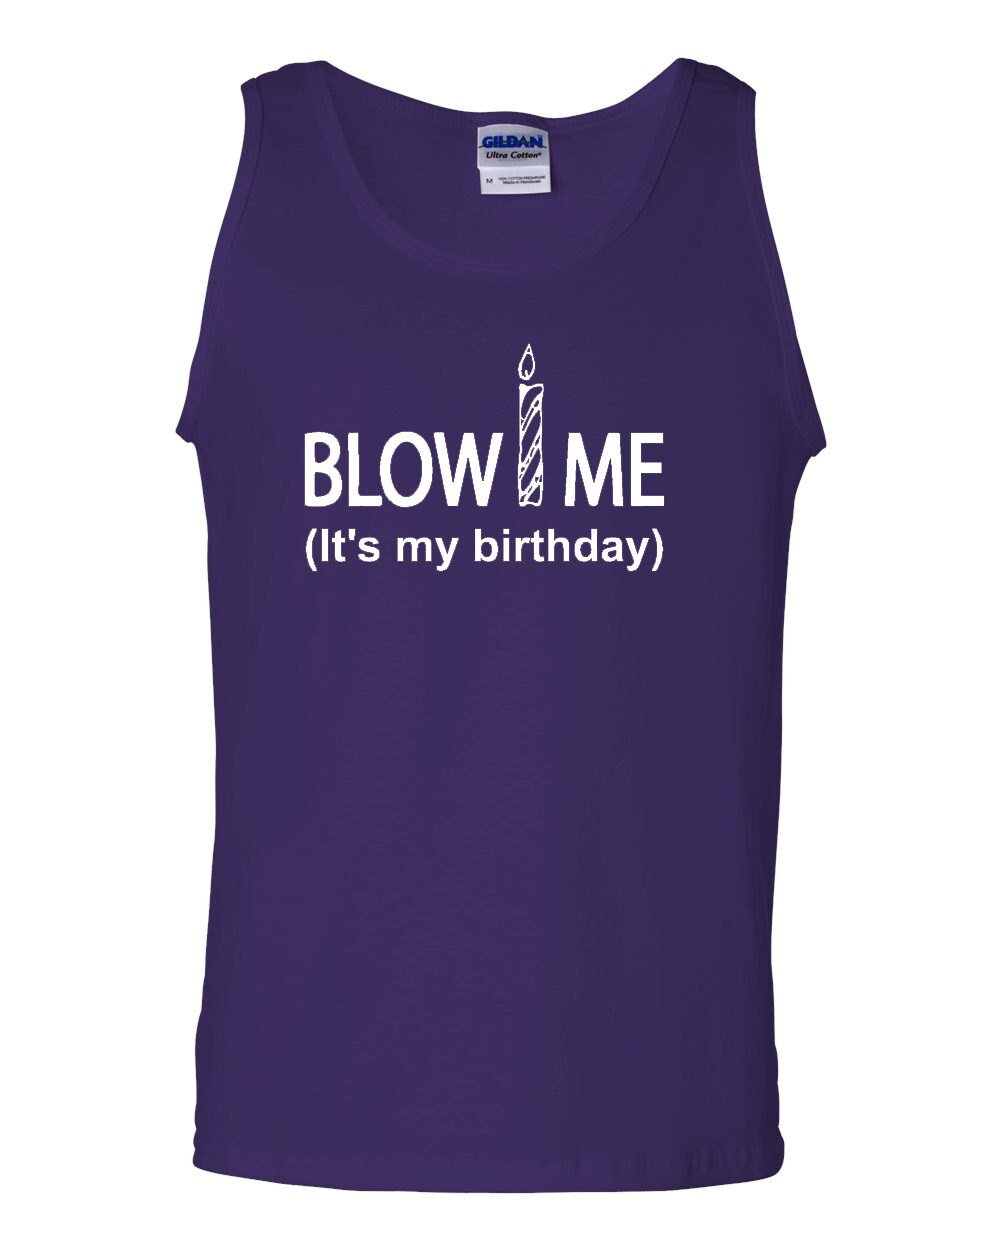 City Shirts Blow Me It's My Birthday Funny Statement Adult Tank Top